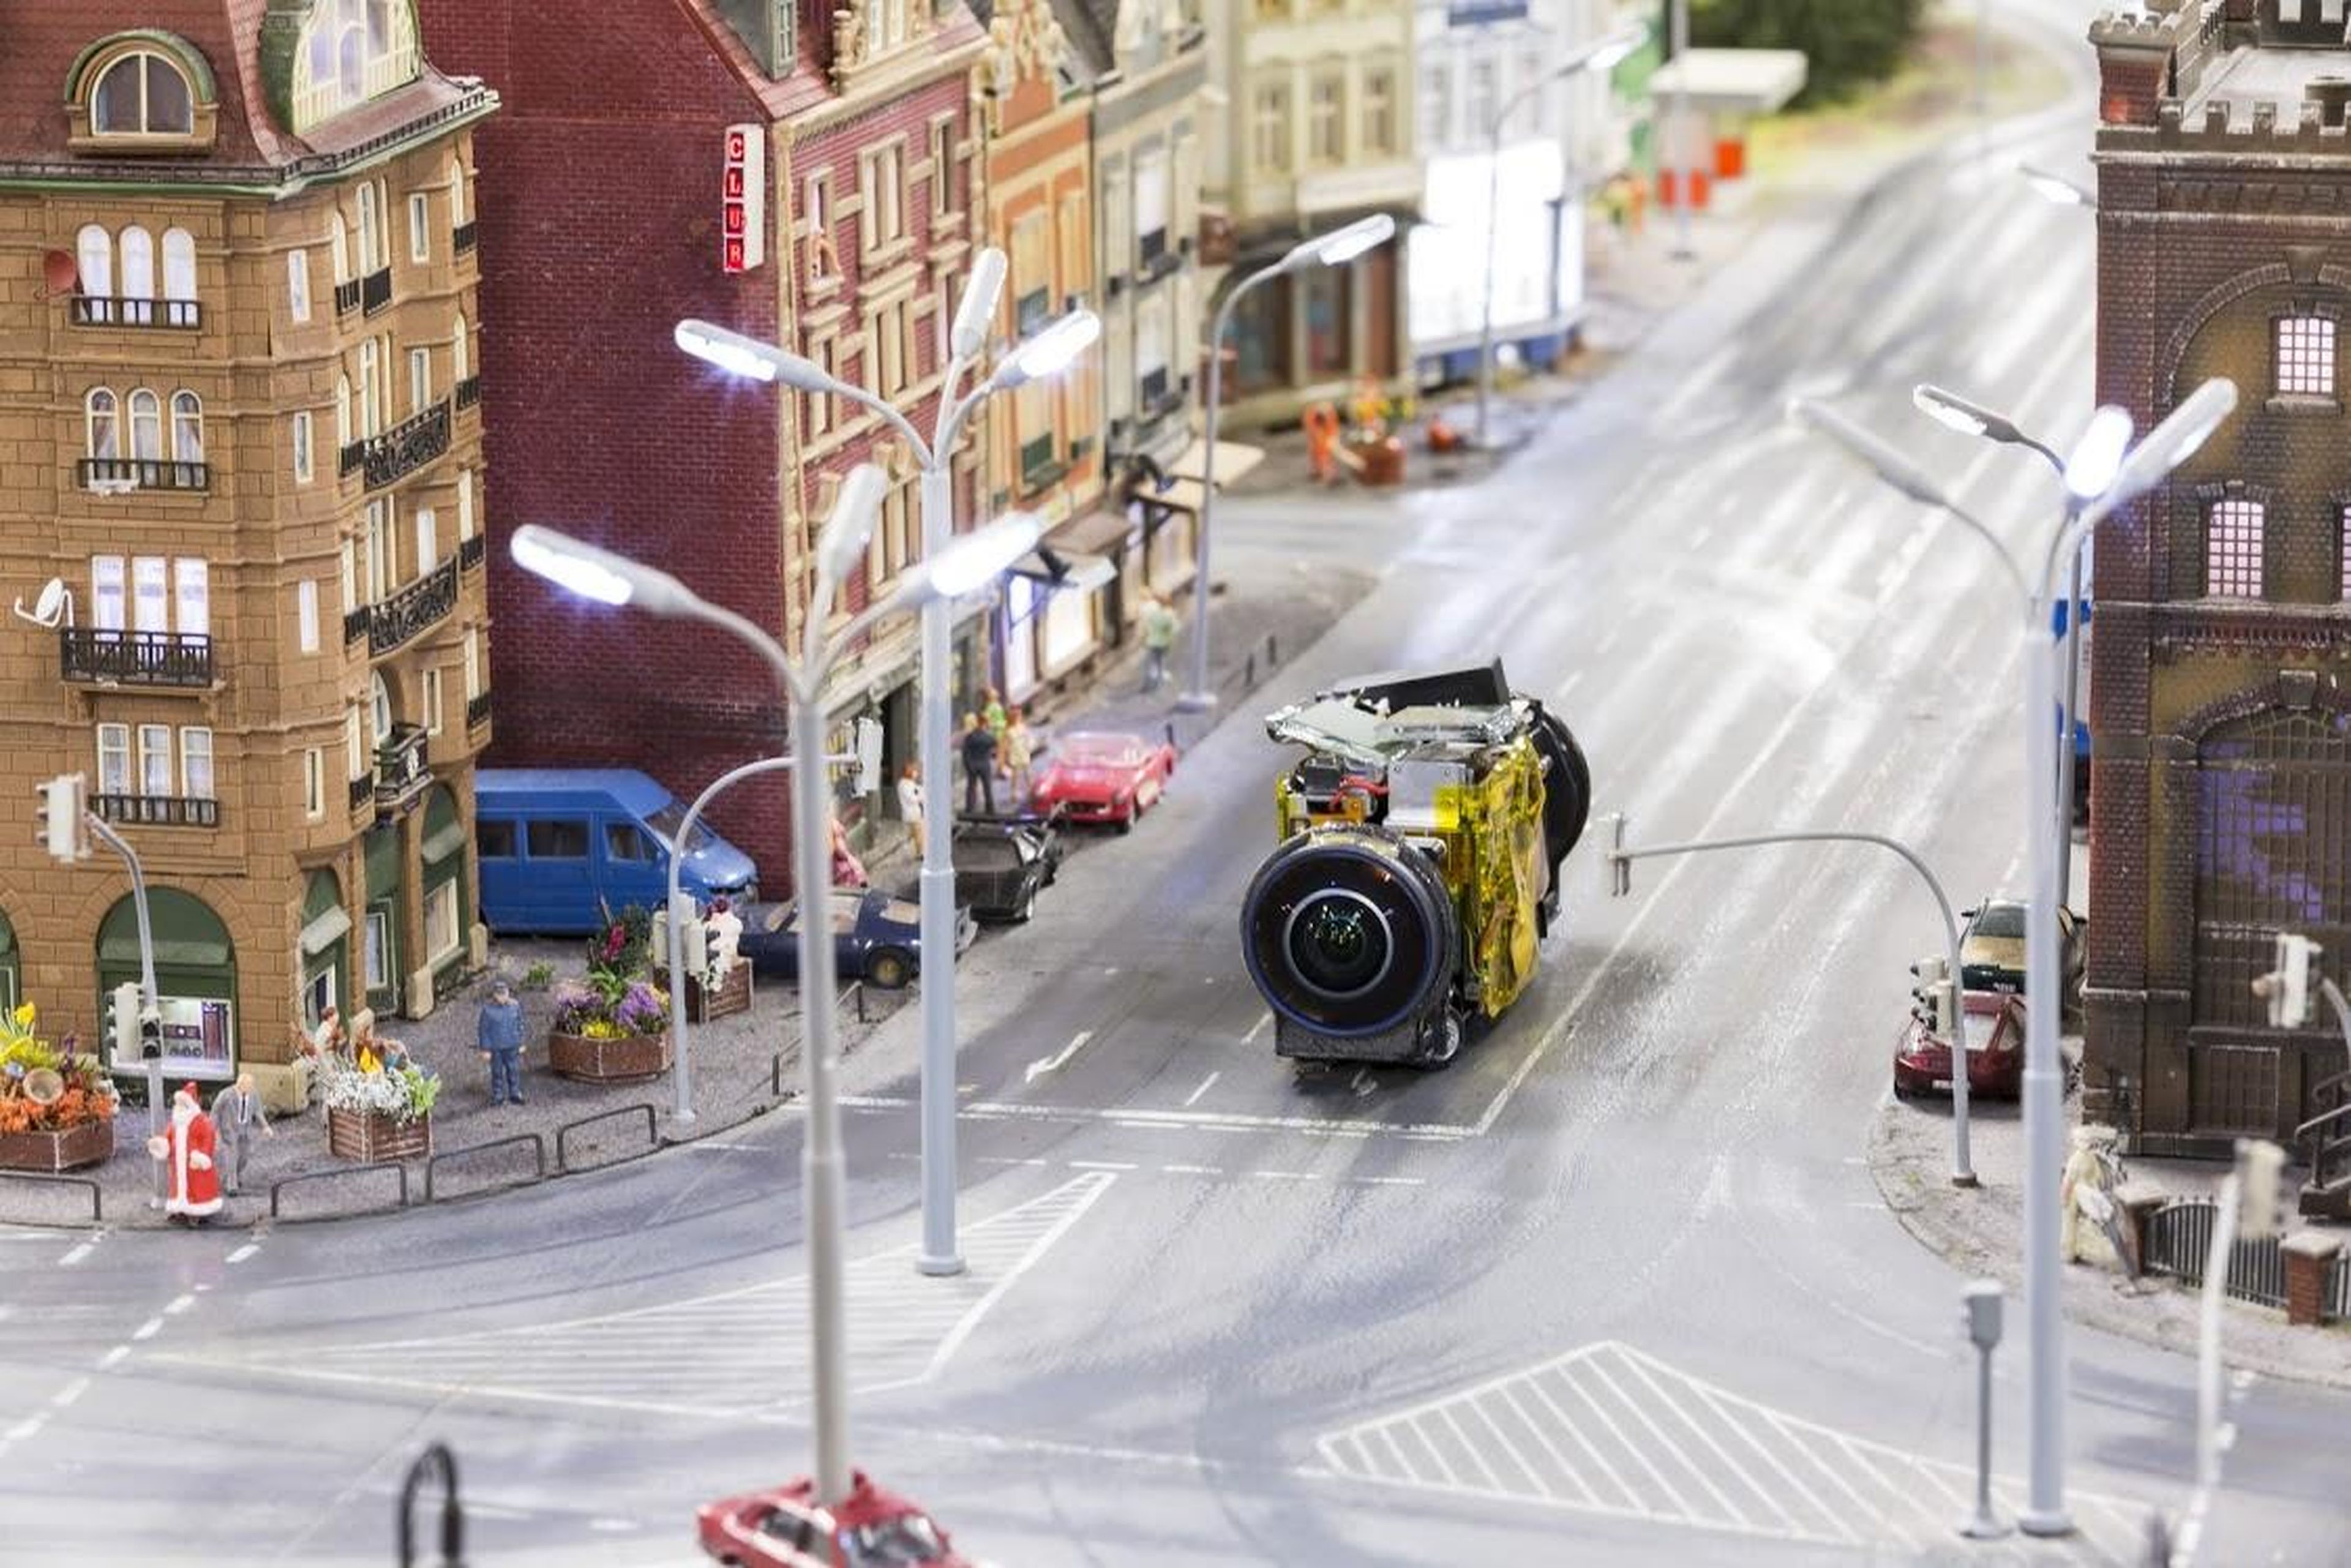 The tiny Street View car couldn't actually film anything, which is why Google and Ubilabs built a fleet of mini camera-mounted devices to cruise the streets ...